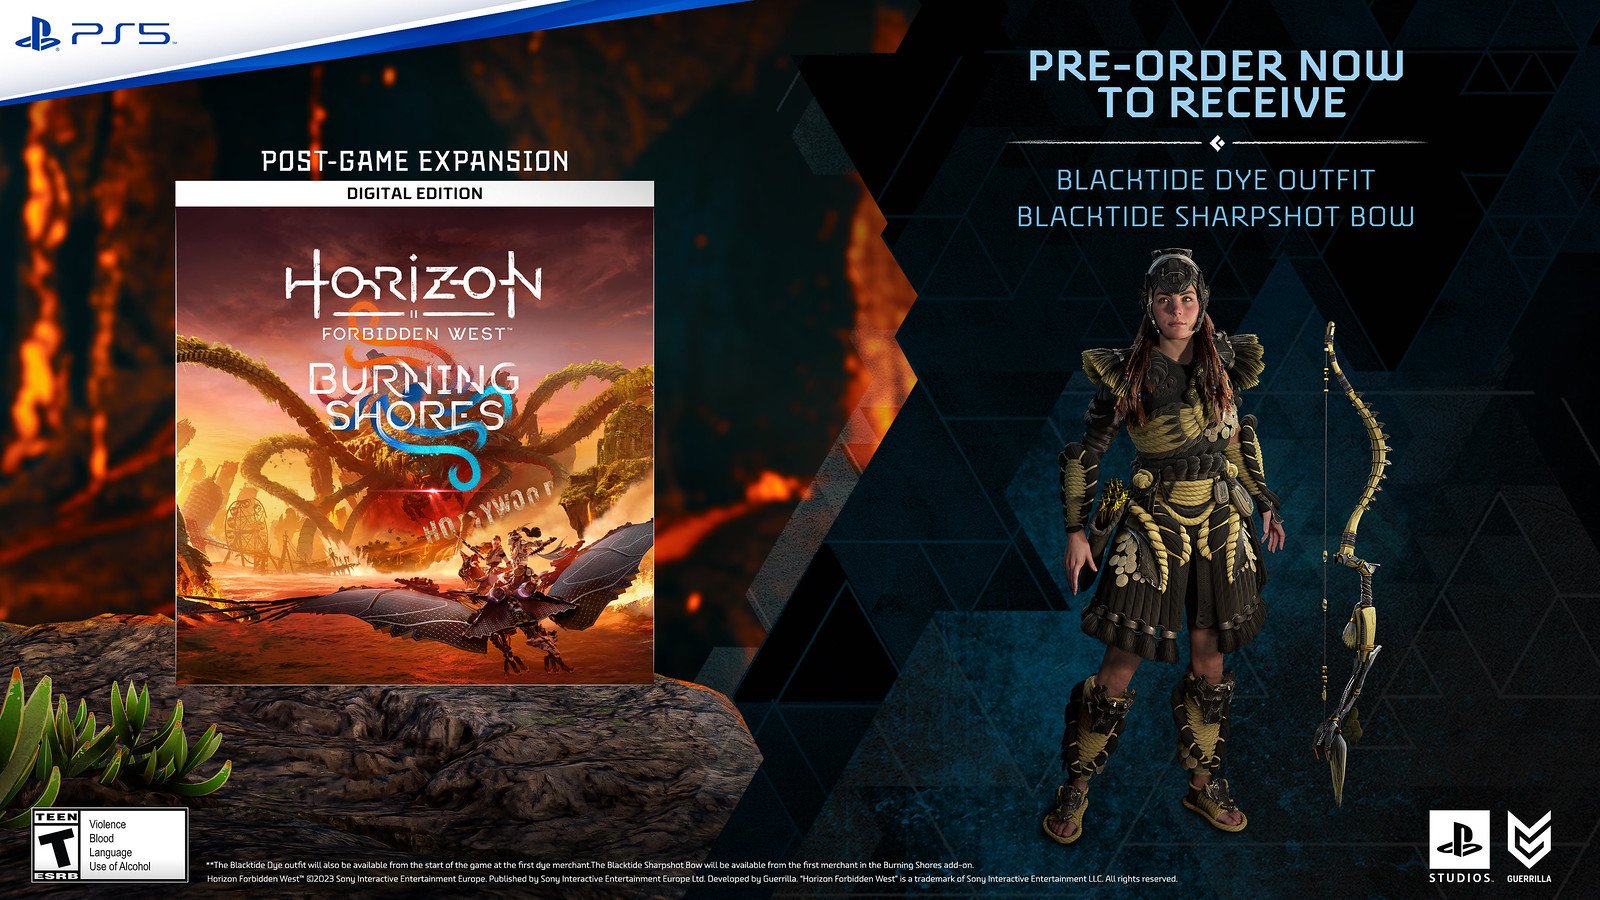 PlayStation is already currently accepting pre-orders of Horizon Forbidden West: Burning Shores